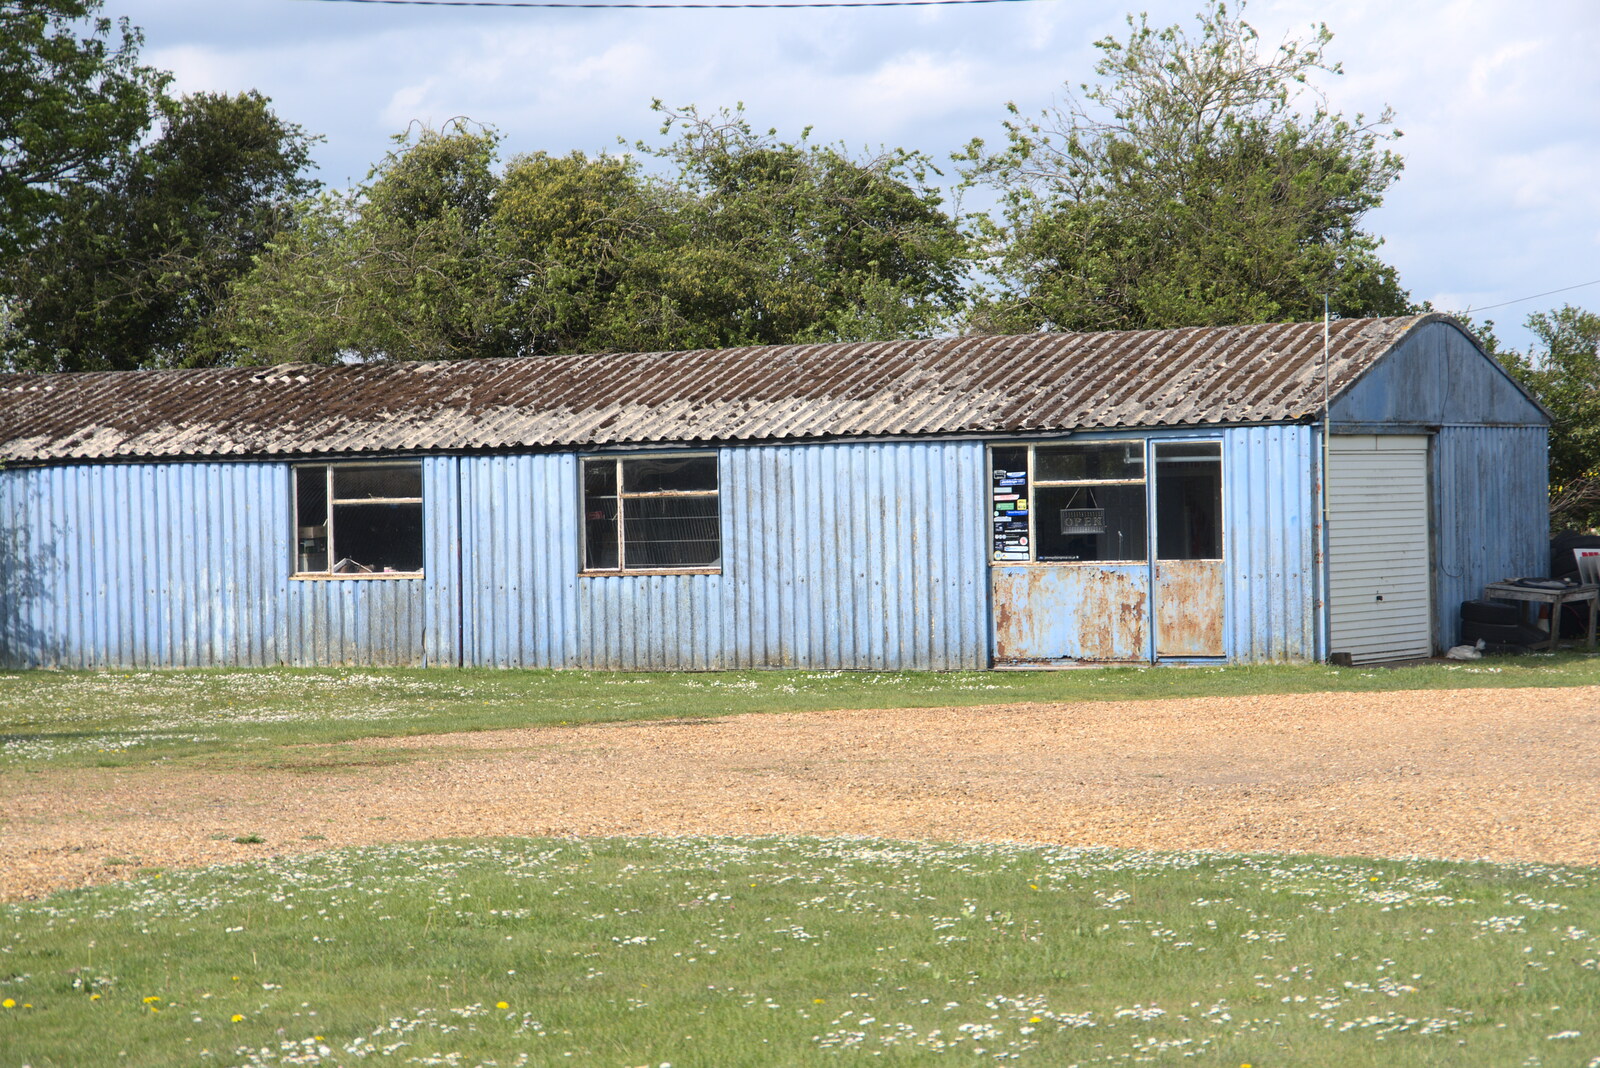 A derelict corrugated-iron workshop from A Vaccination Afternoon, Swaffham, Norfolk - 9th May 2021